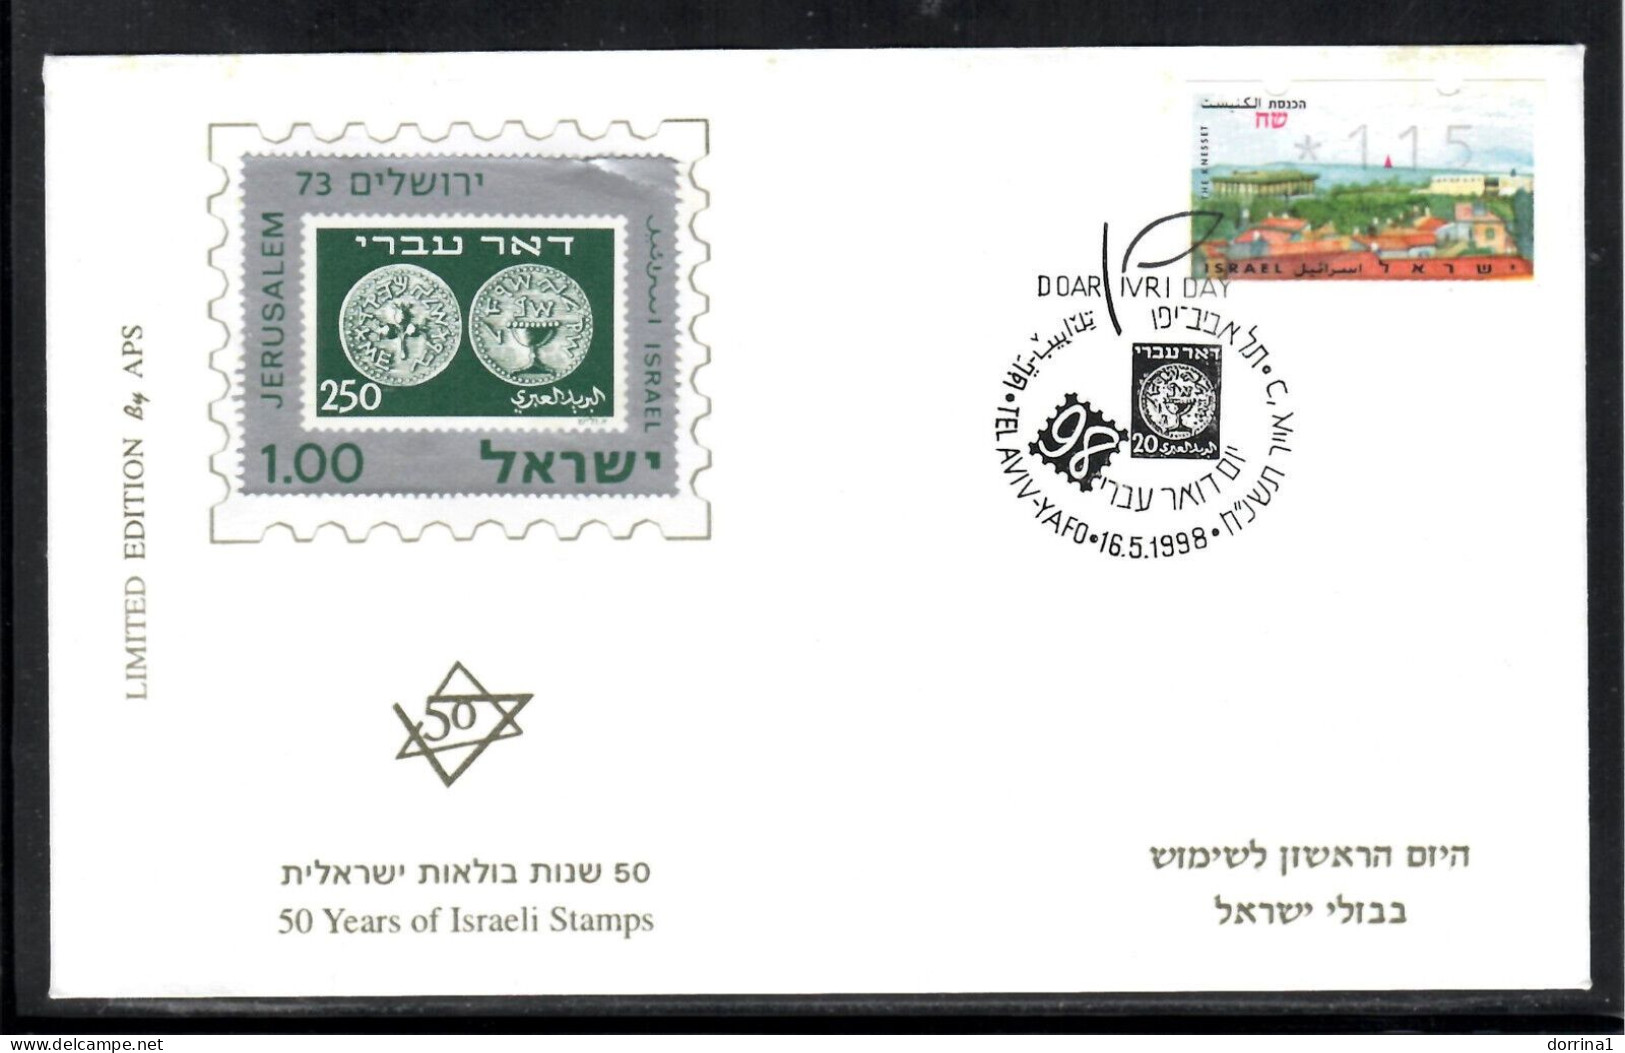 Doar Ivri Day May 16 1998 Cover Israel Limited Edition 300 Covers Only No. 0106 - Storia Postale